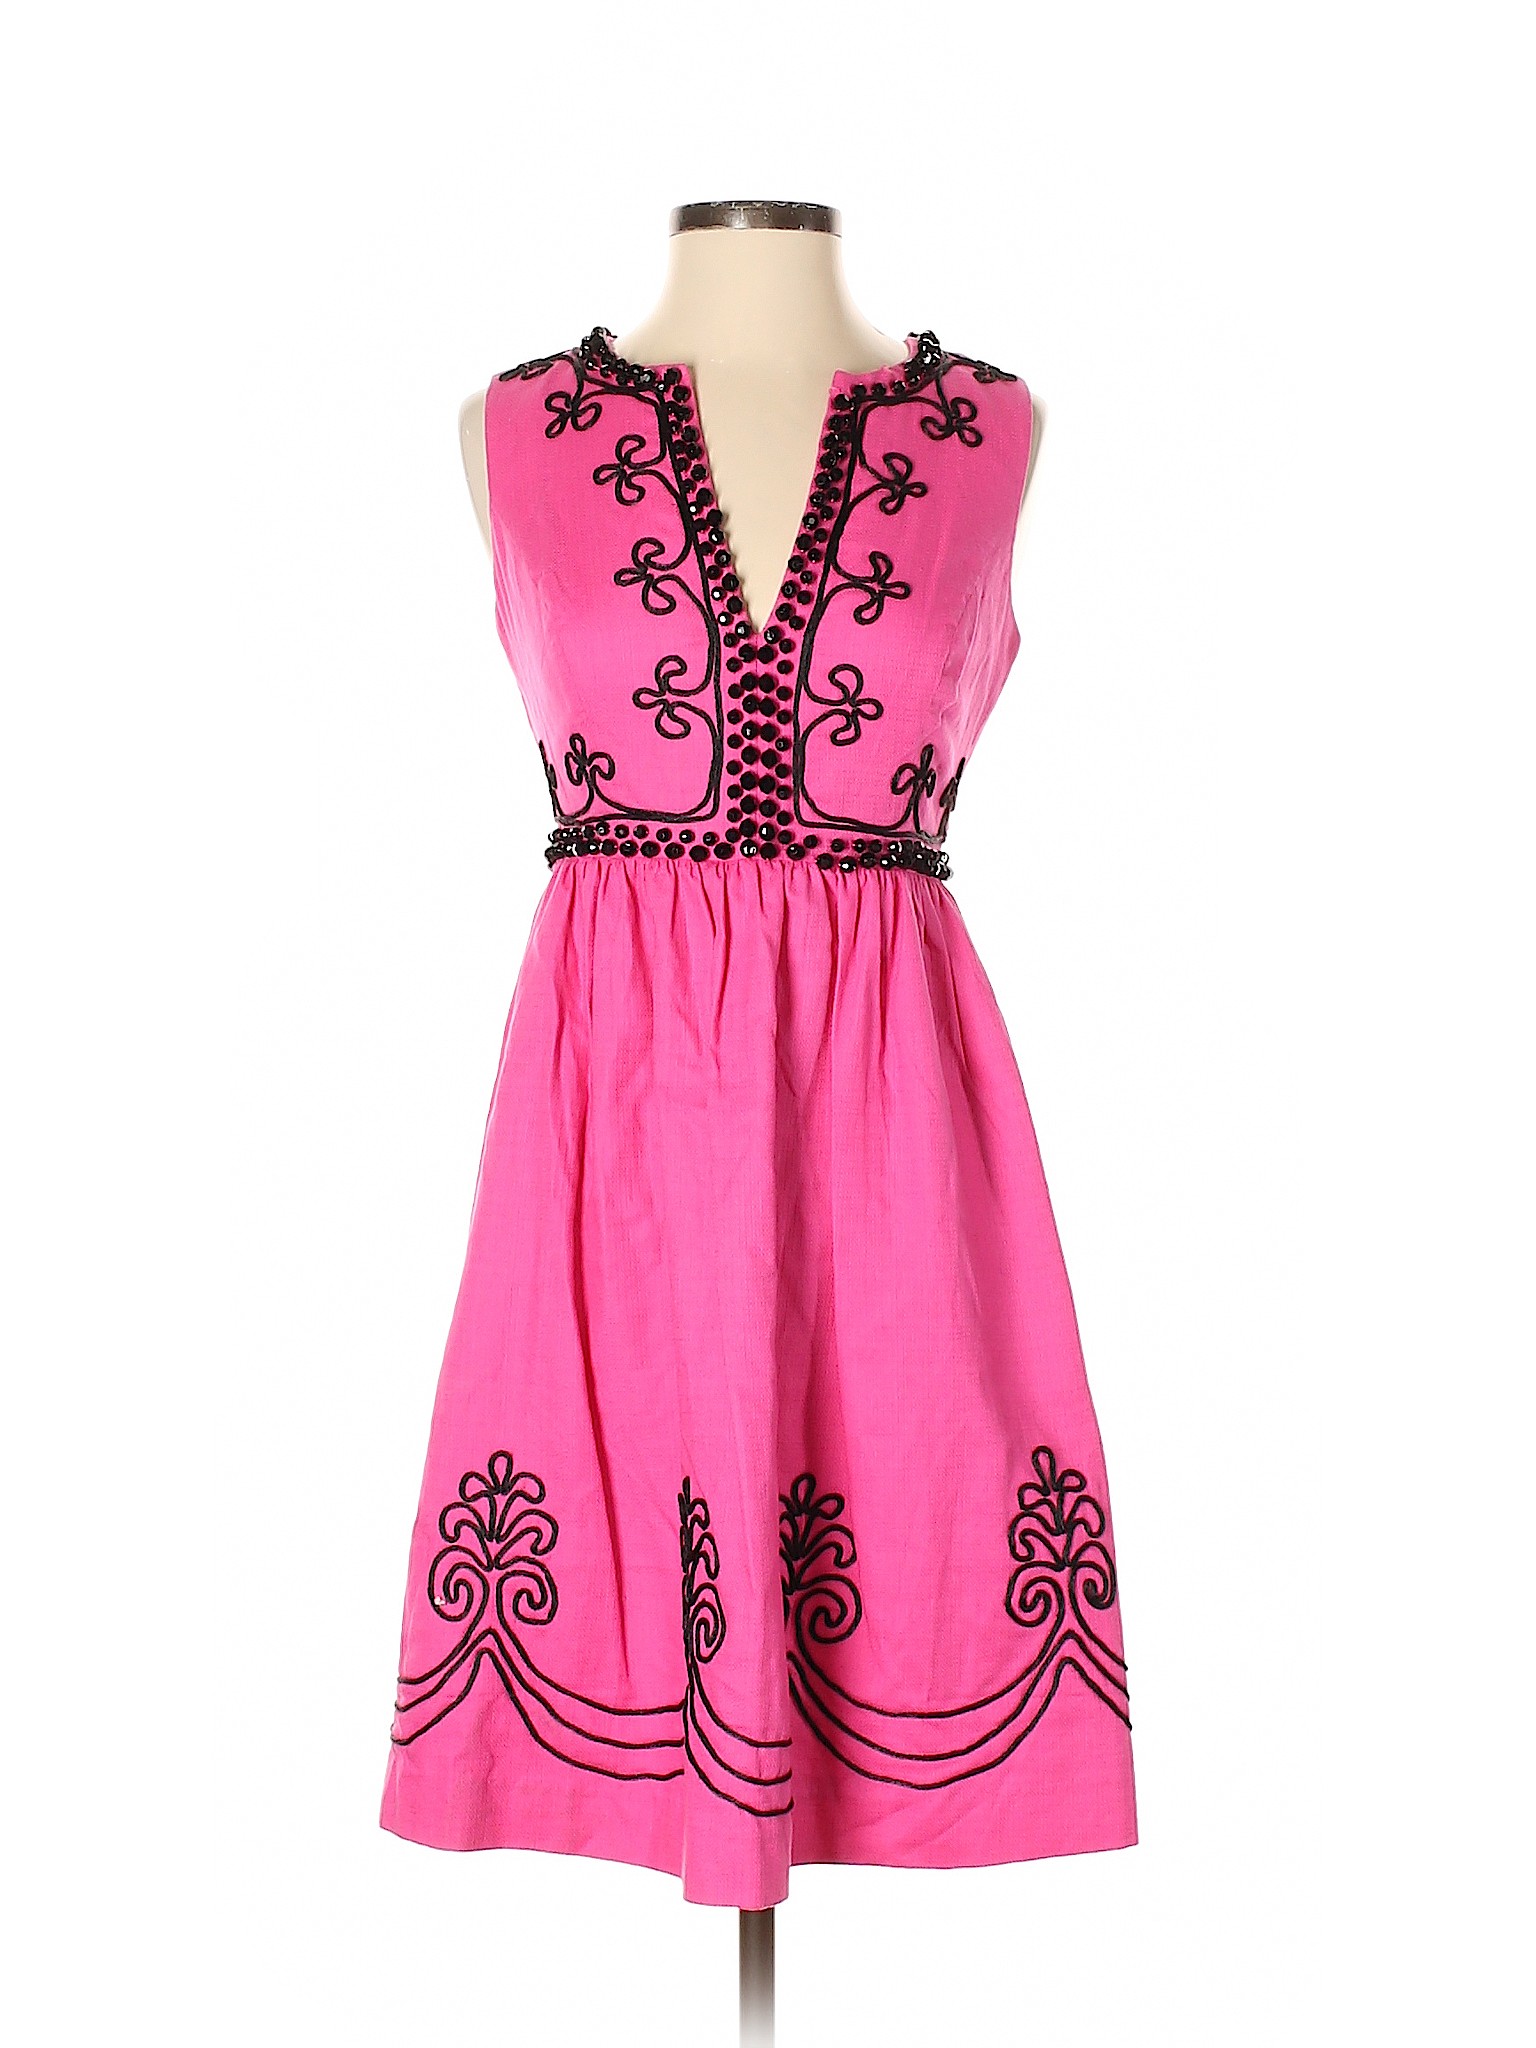 Lilly Pulitzer 100% Cotton Solid Pink Casual Dress Size 2 - 79% off ...